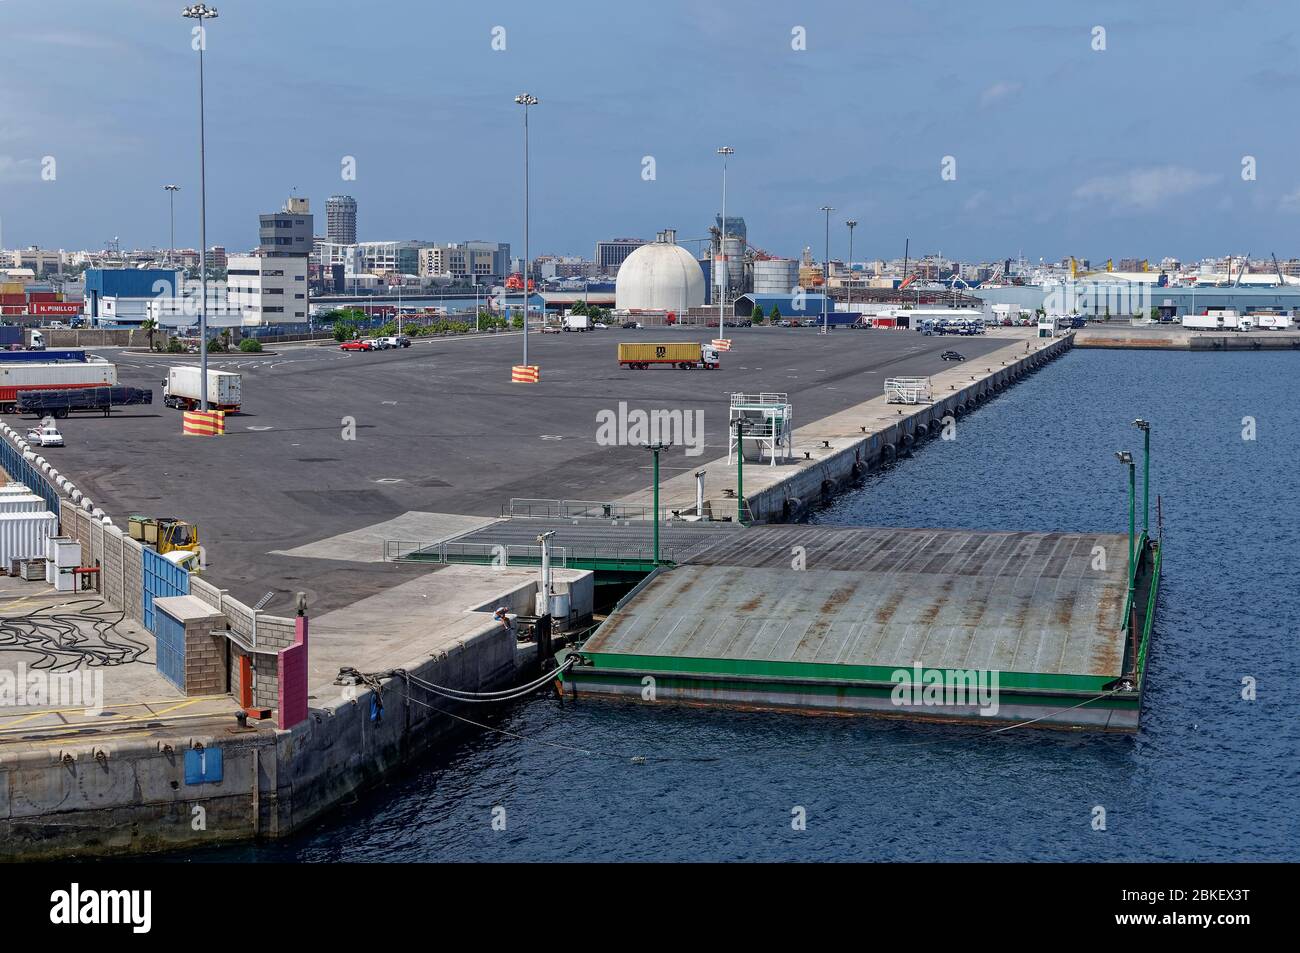 The empty Floating Quay for Loading and Unloading Vehicles at the Ferry  Terminal in Las Palmas Port Stock Photo - Alamy